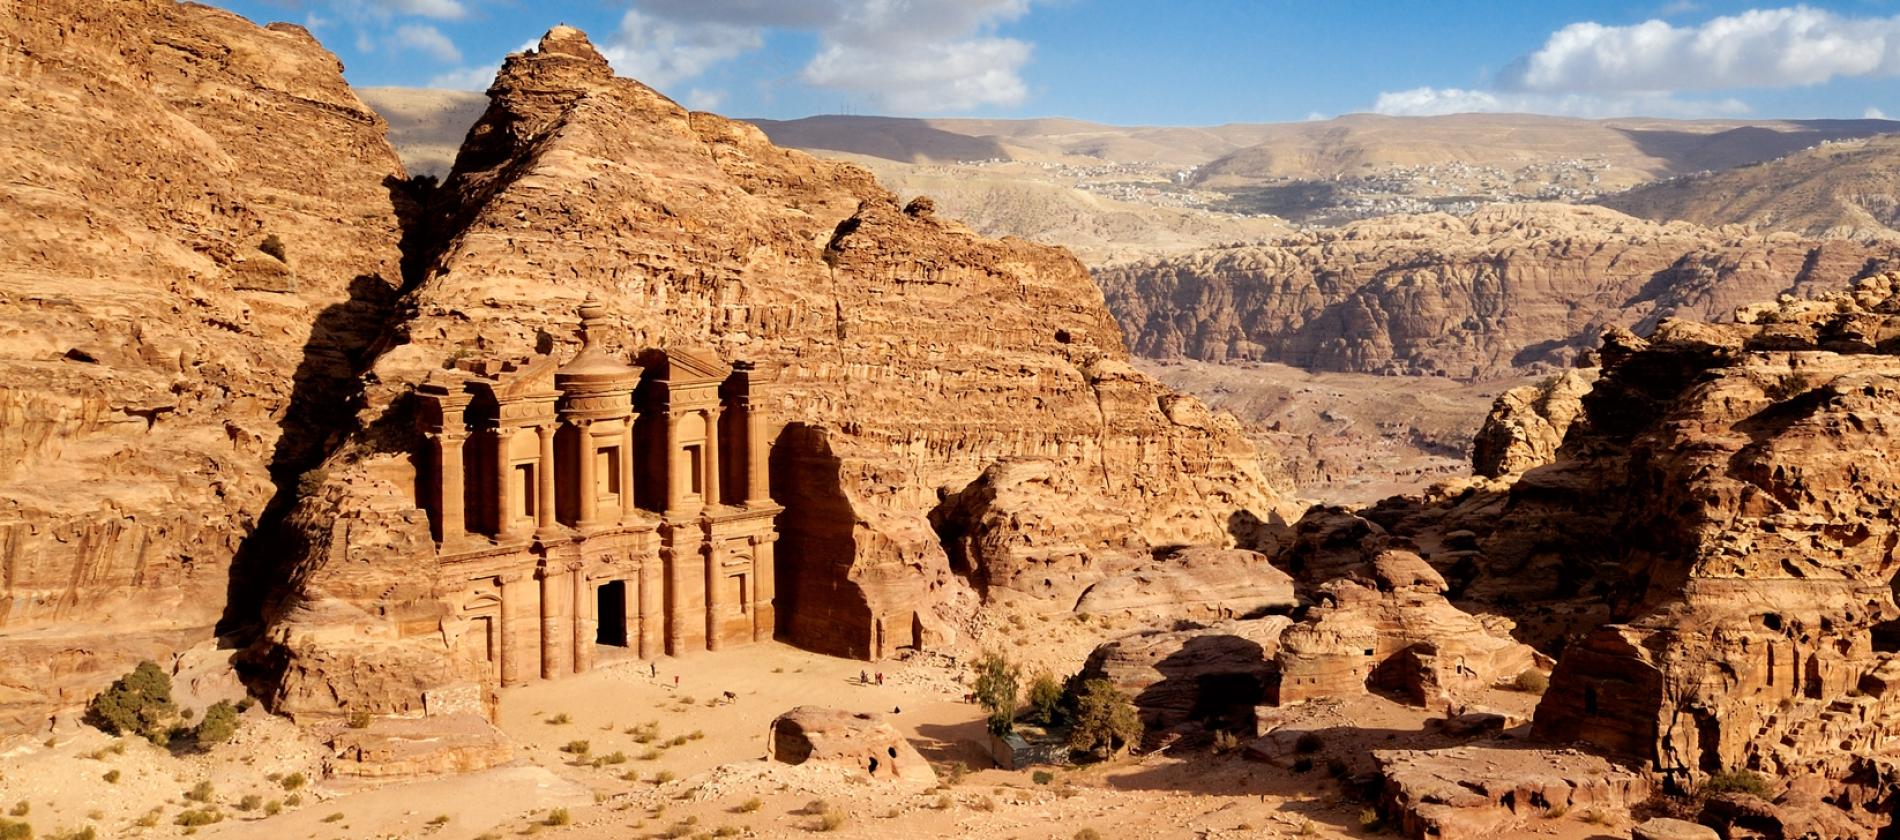 amazing view of the Petra